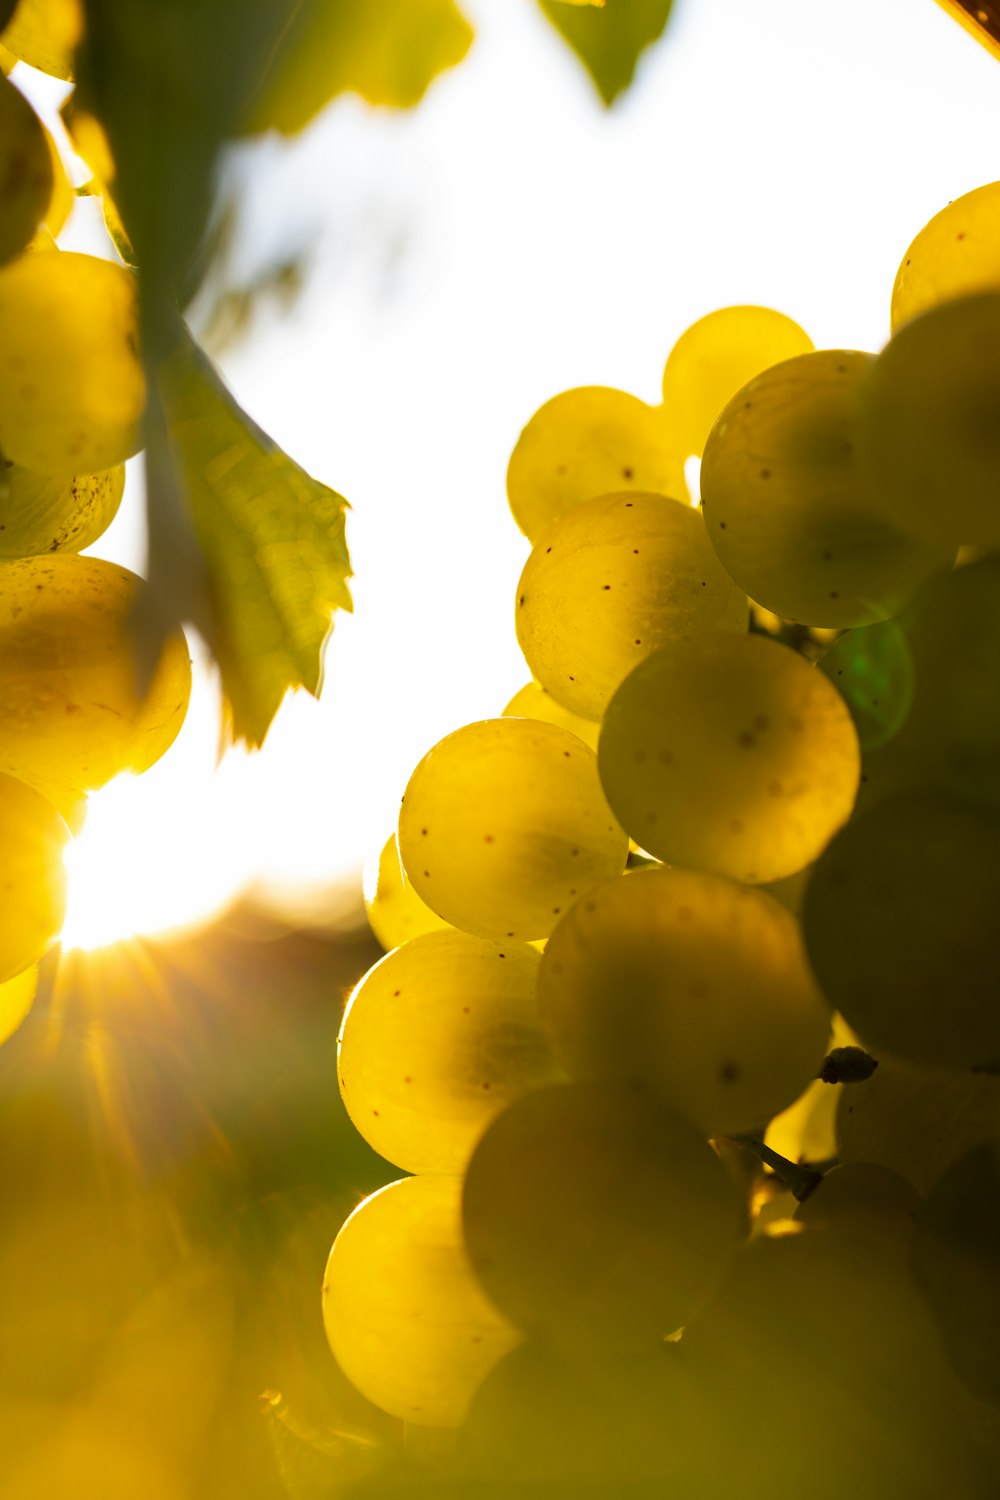 100+ Grape Pictures | Download Free Images on Unsplash